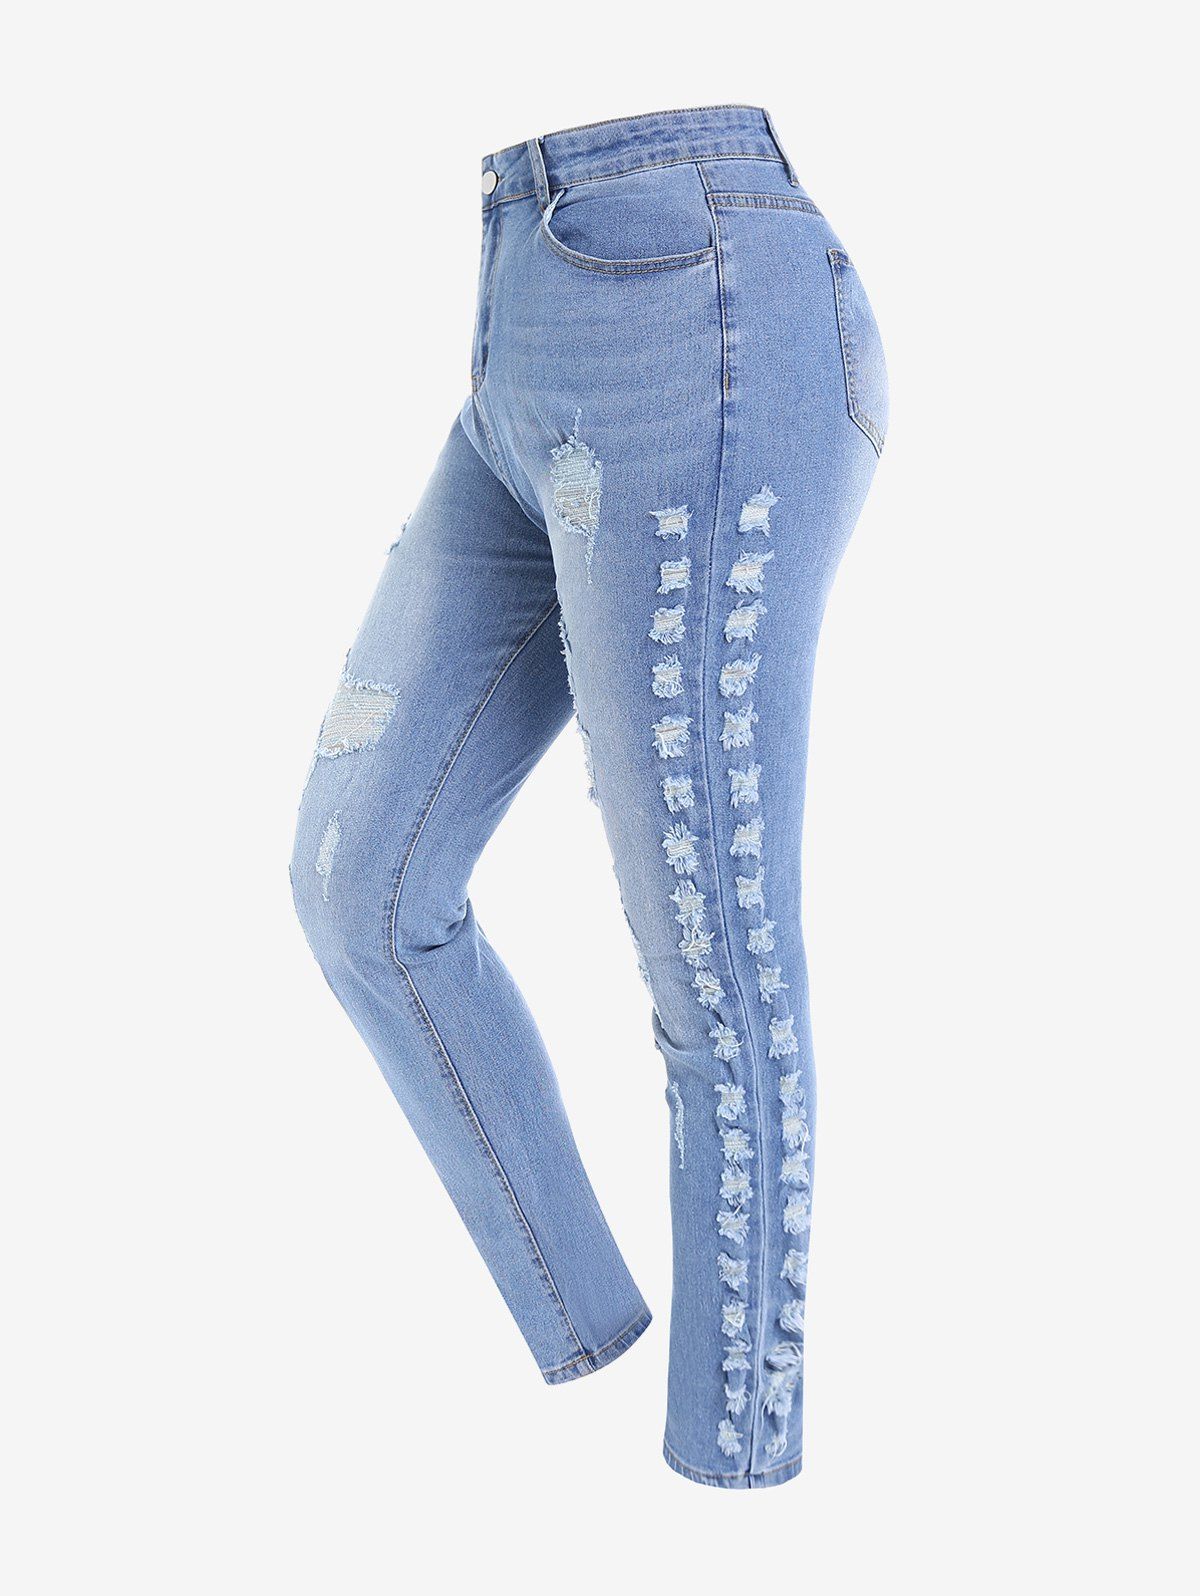 Plus Size Ripped Faded Skinny Jeans - LIGHT BLUE 4X